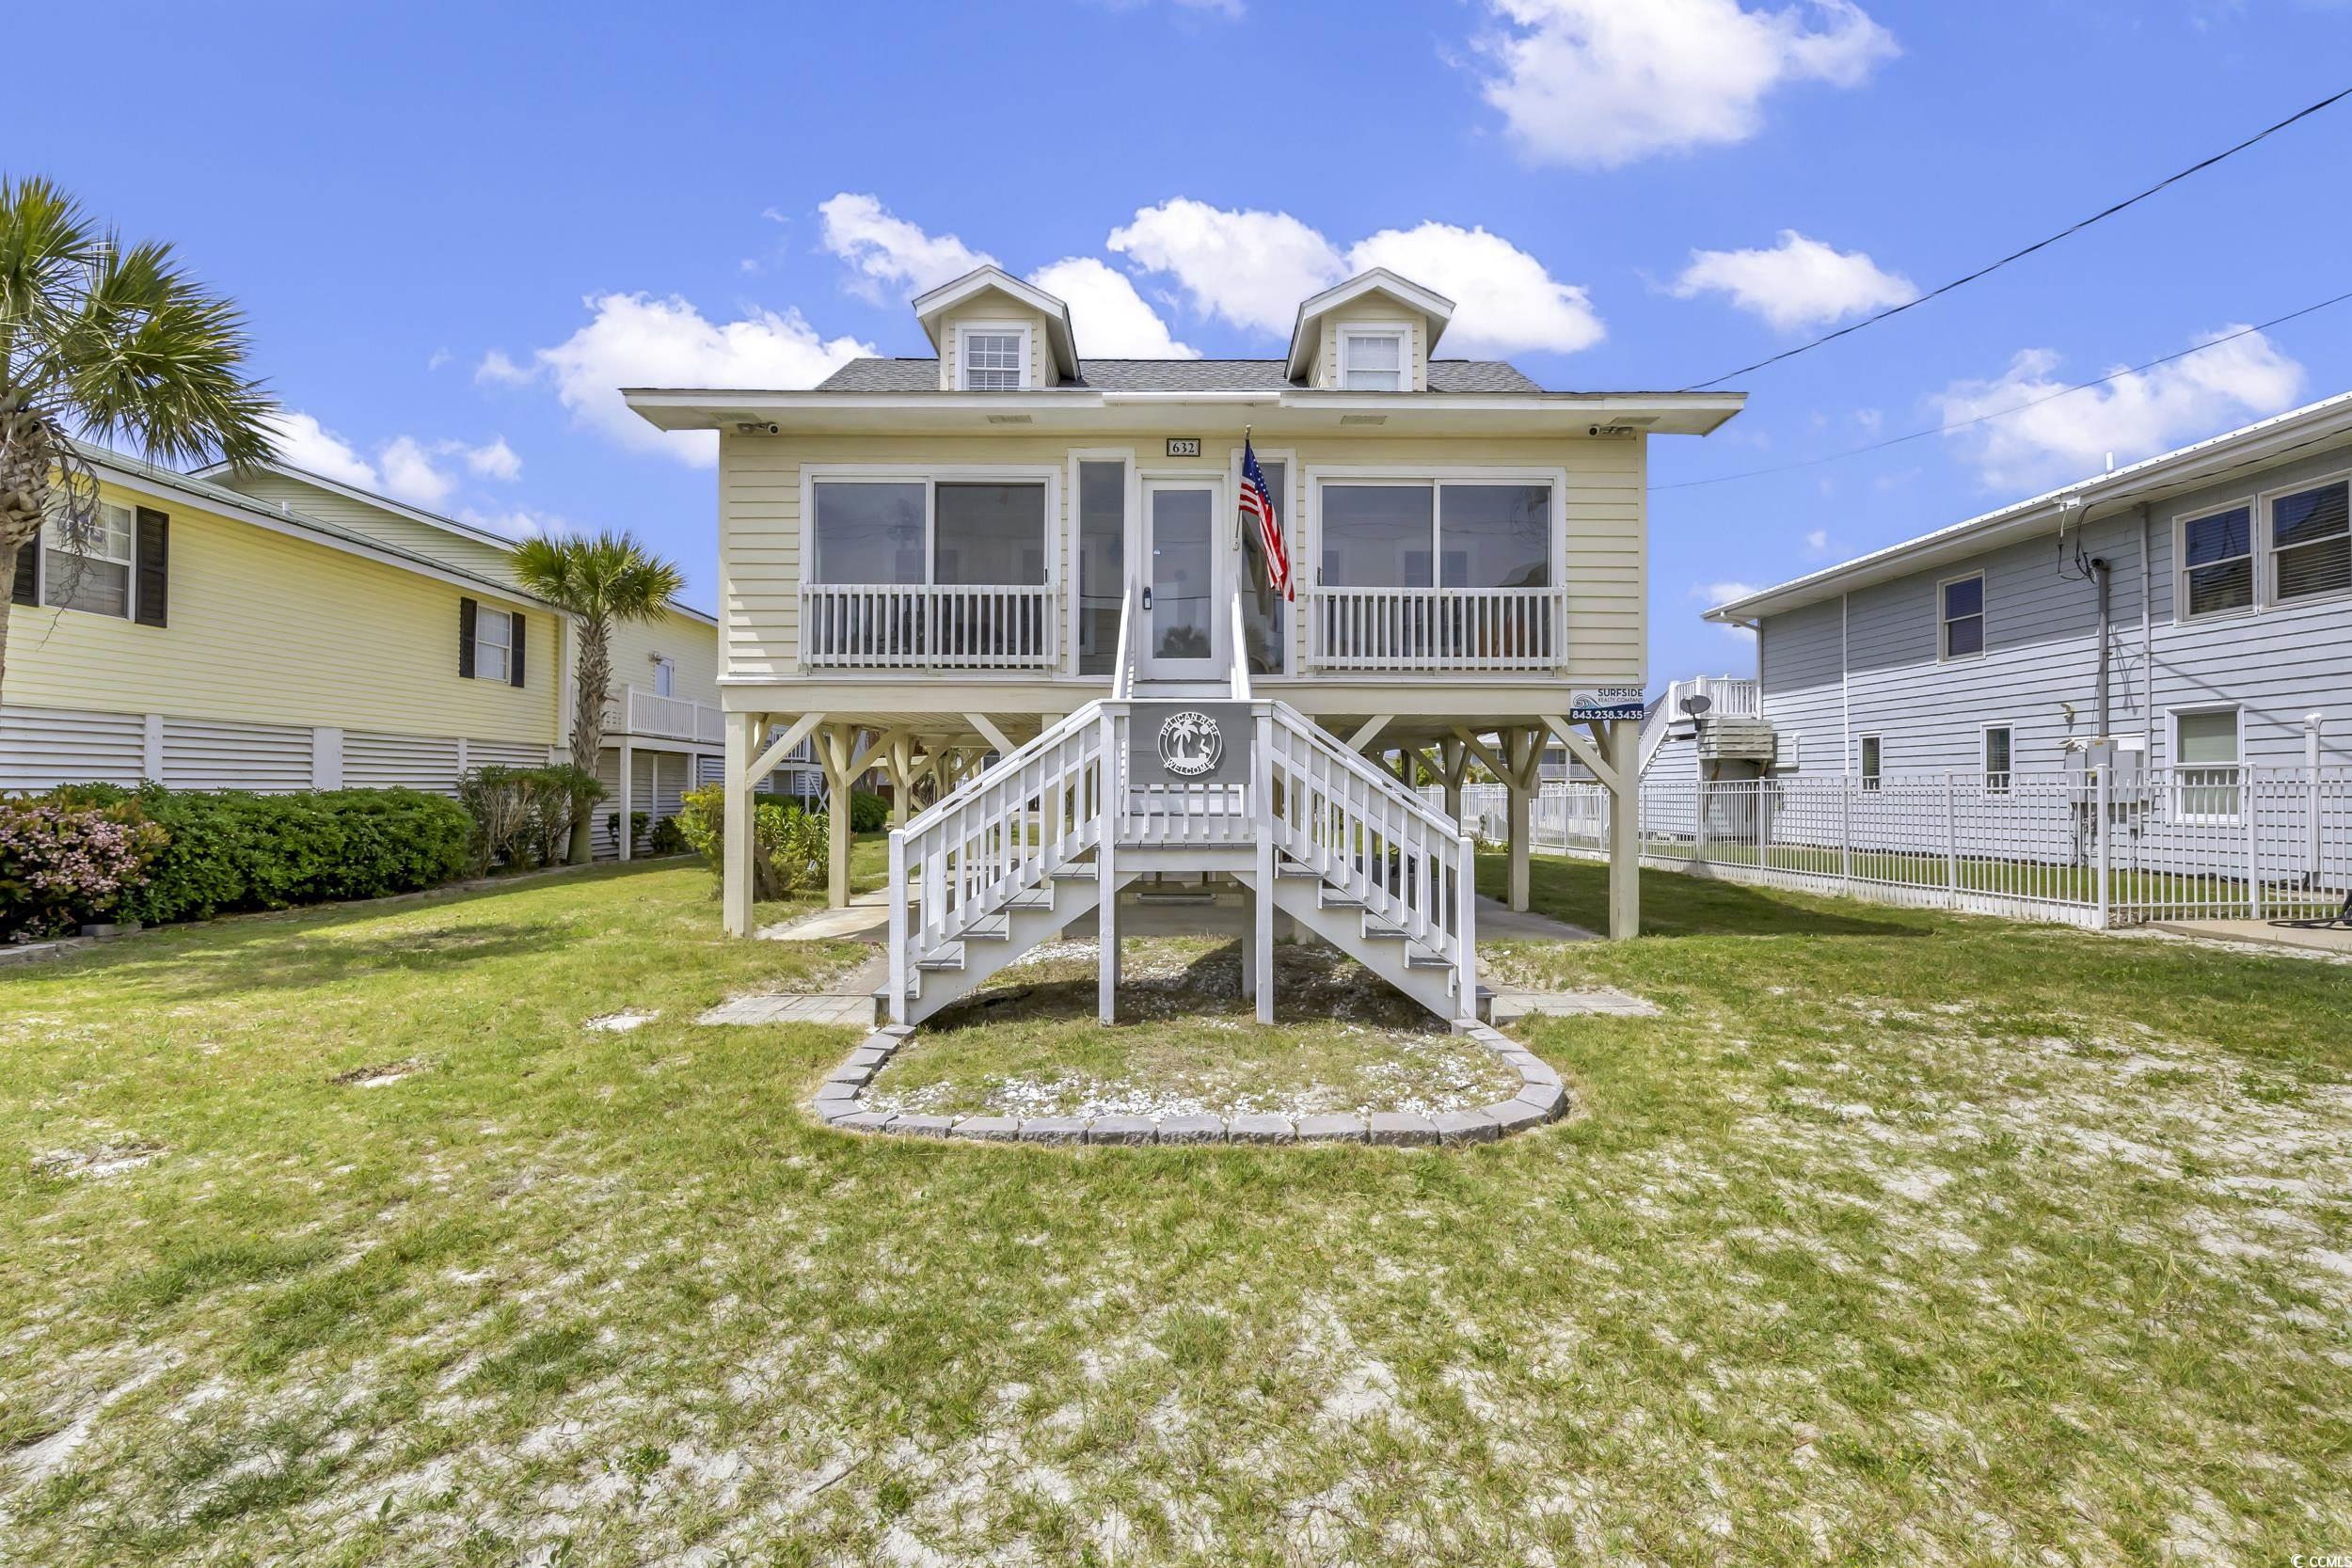 632 South Waccamaw Dr. Murrells Inlet, SC 29576